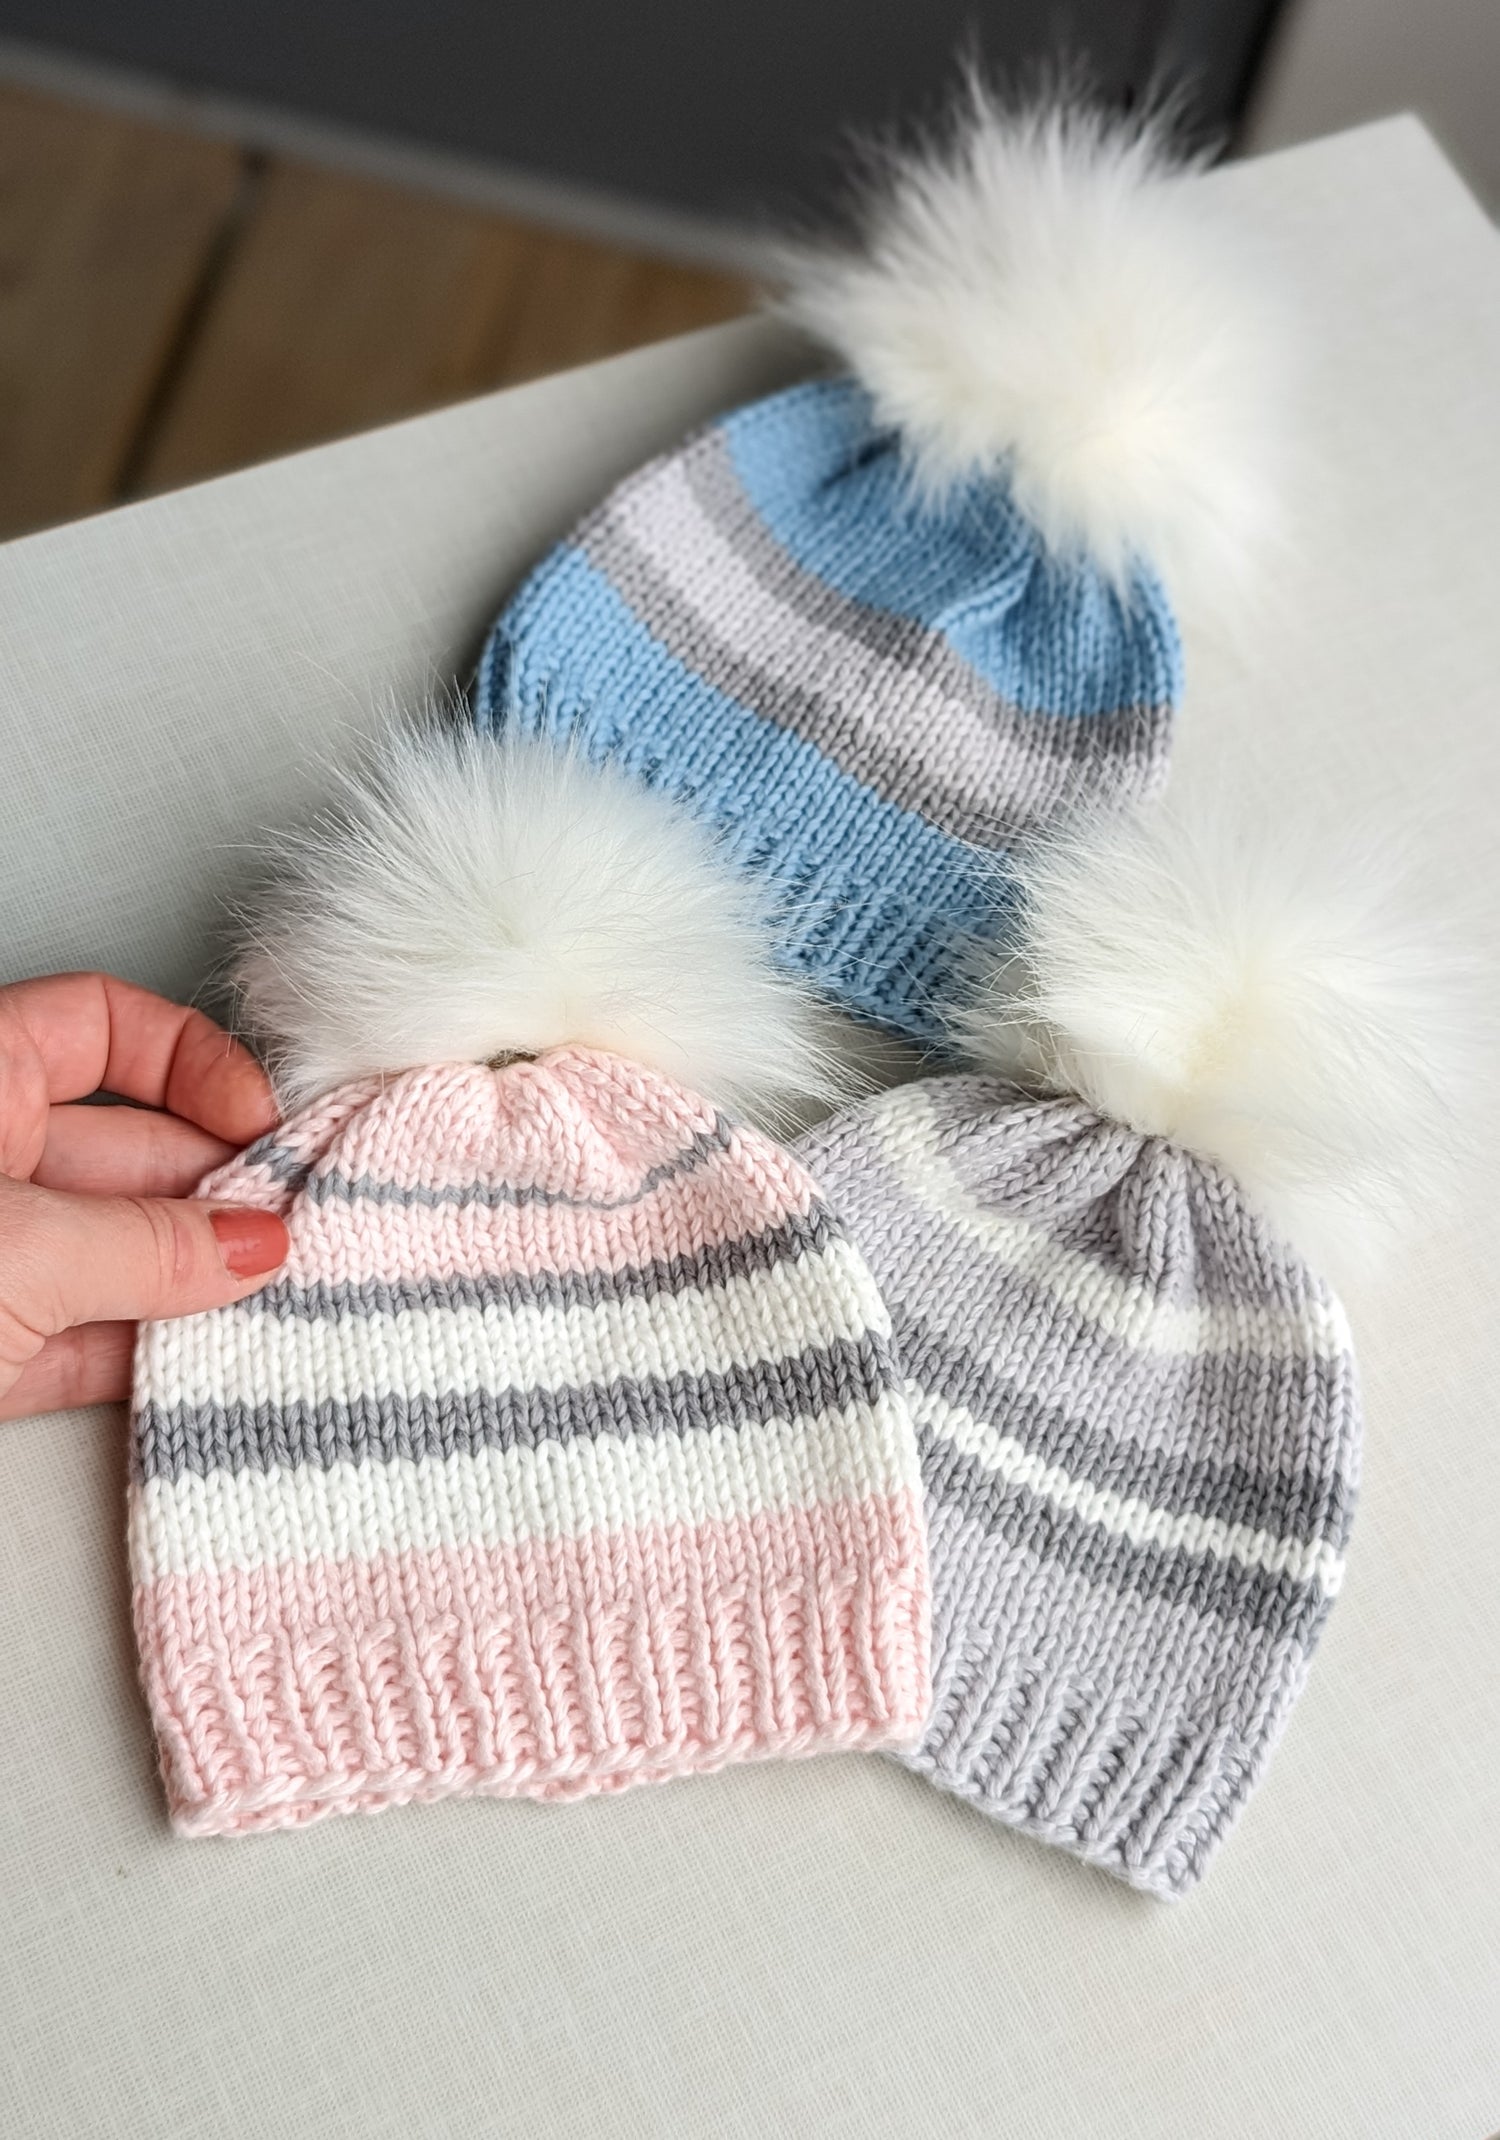 Cotton Baby Hats